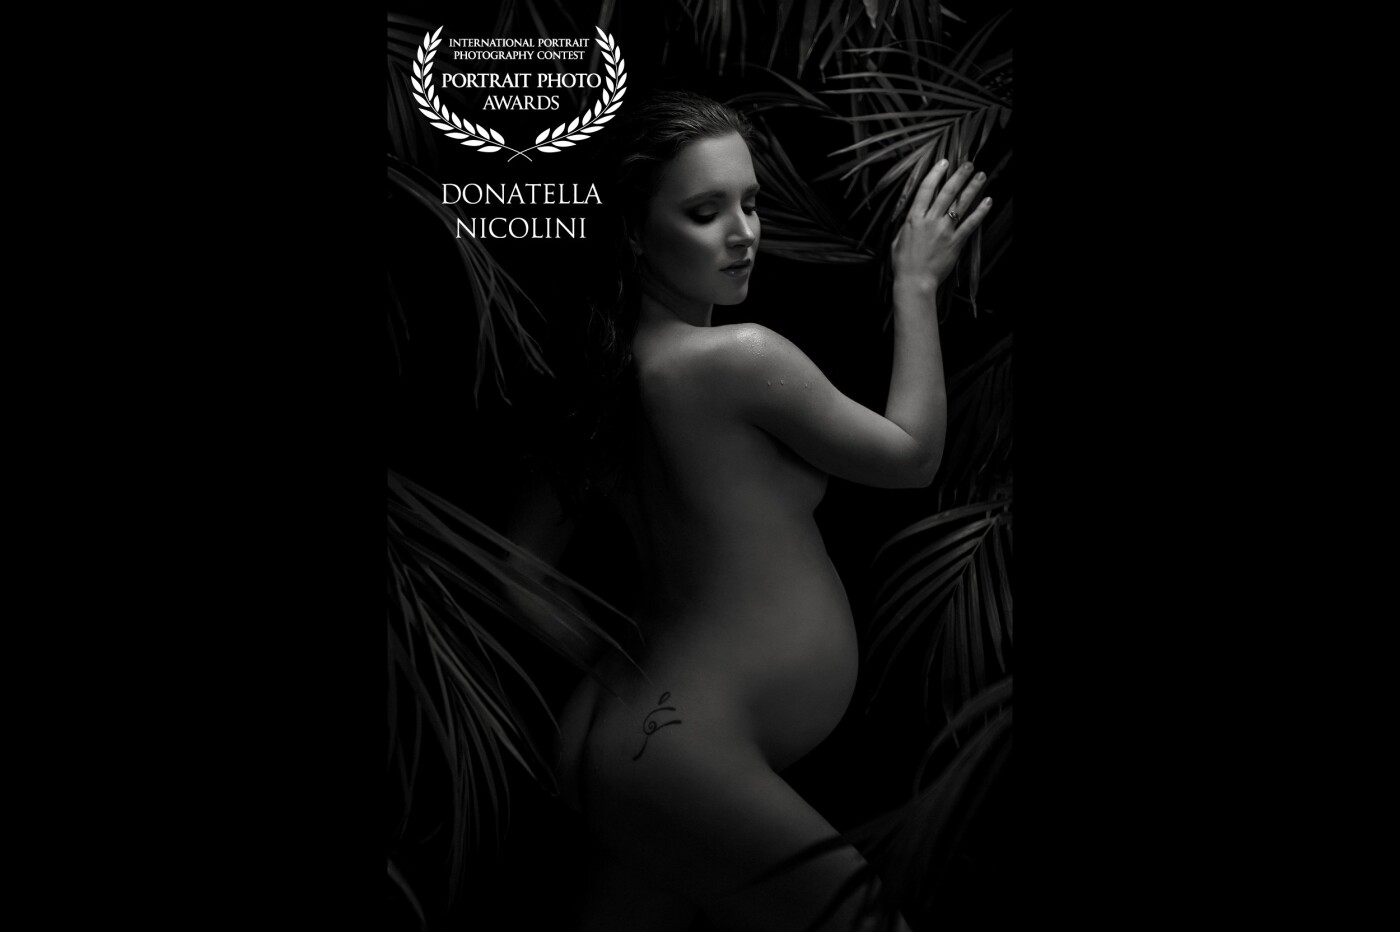 This photo was taken in my studio in Milano, Italy. I wanted to create a wild, jungle environment, using real palm leaves that I positioned on different levels and distances, showing the connection between the beauty and power of nature and the miracle of pregnancy. <br />
This image was shot on a Nikon D750, using Nikon 24-70mm f 2.8 lens.